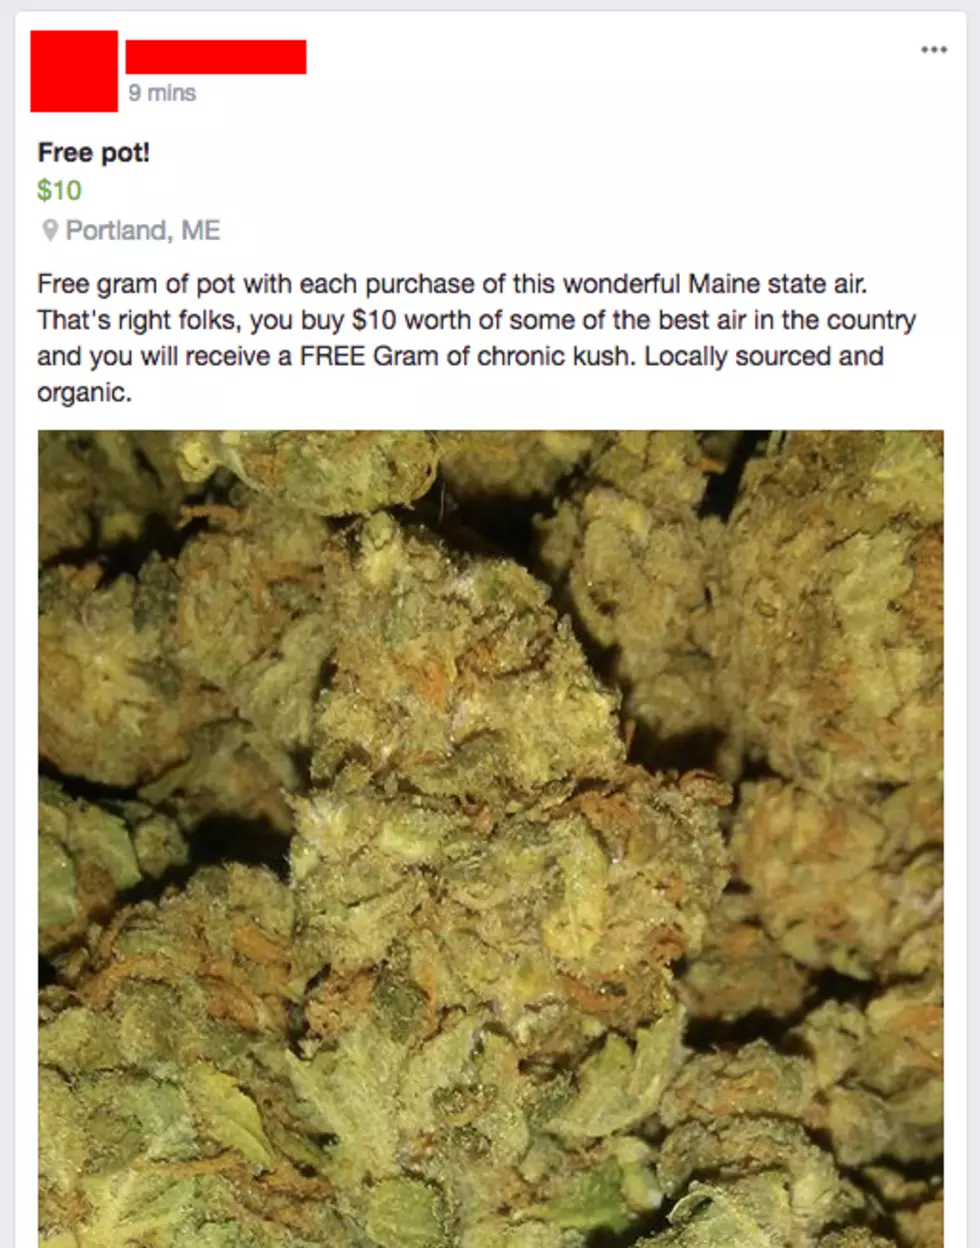 Buy Some Fresh Maine Air, and Get Some Free Pot!